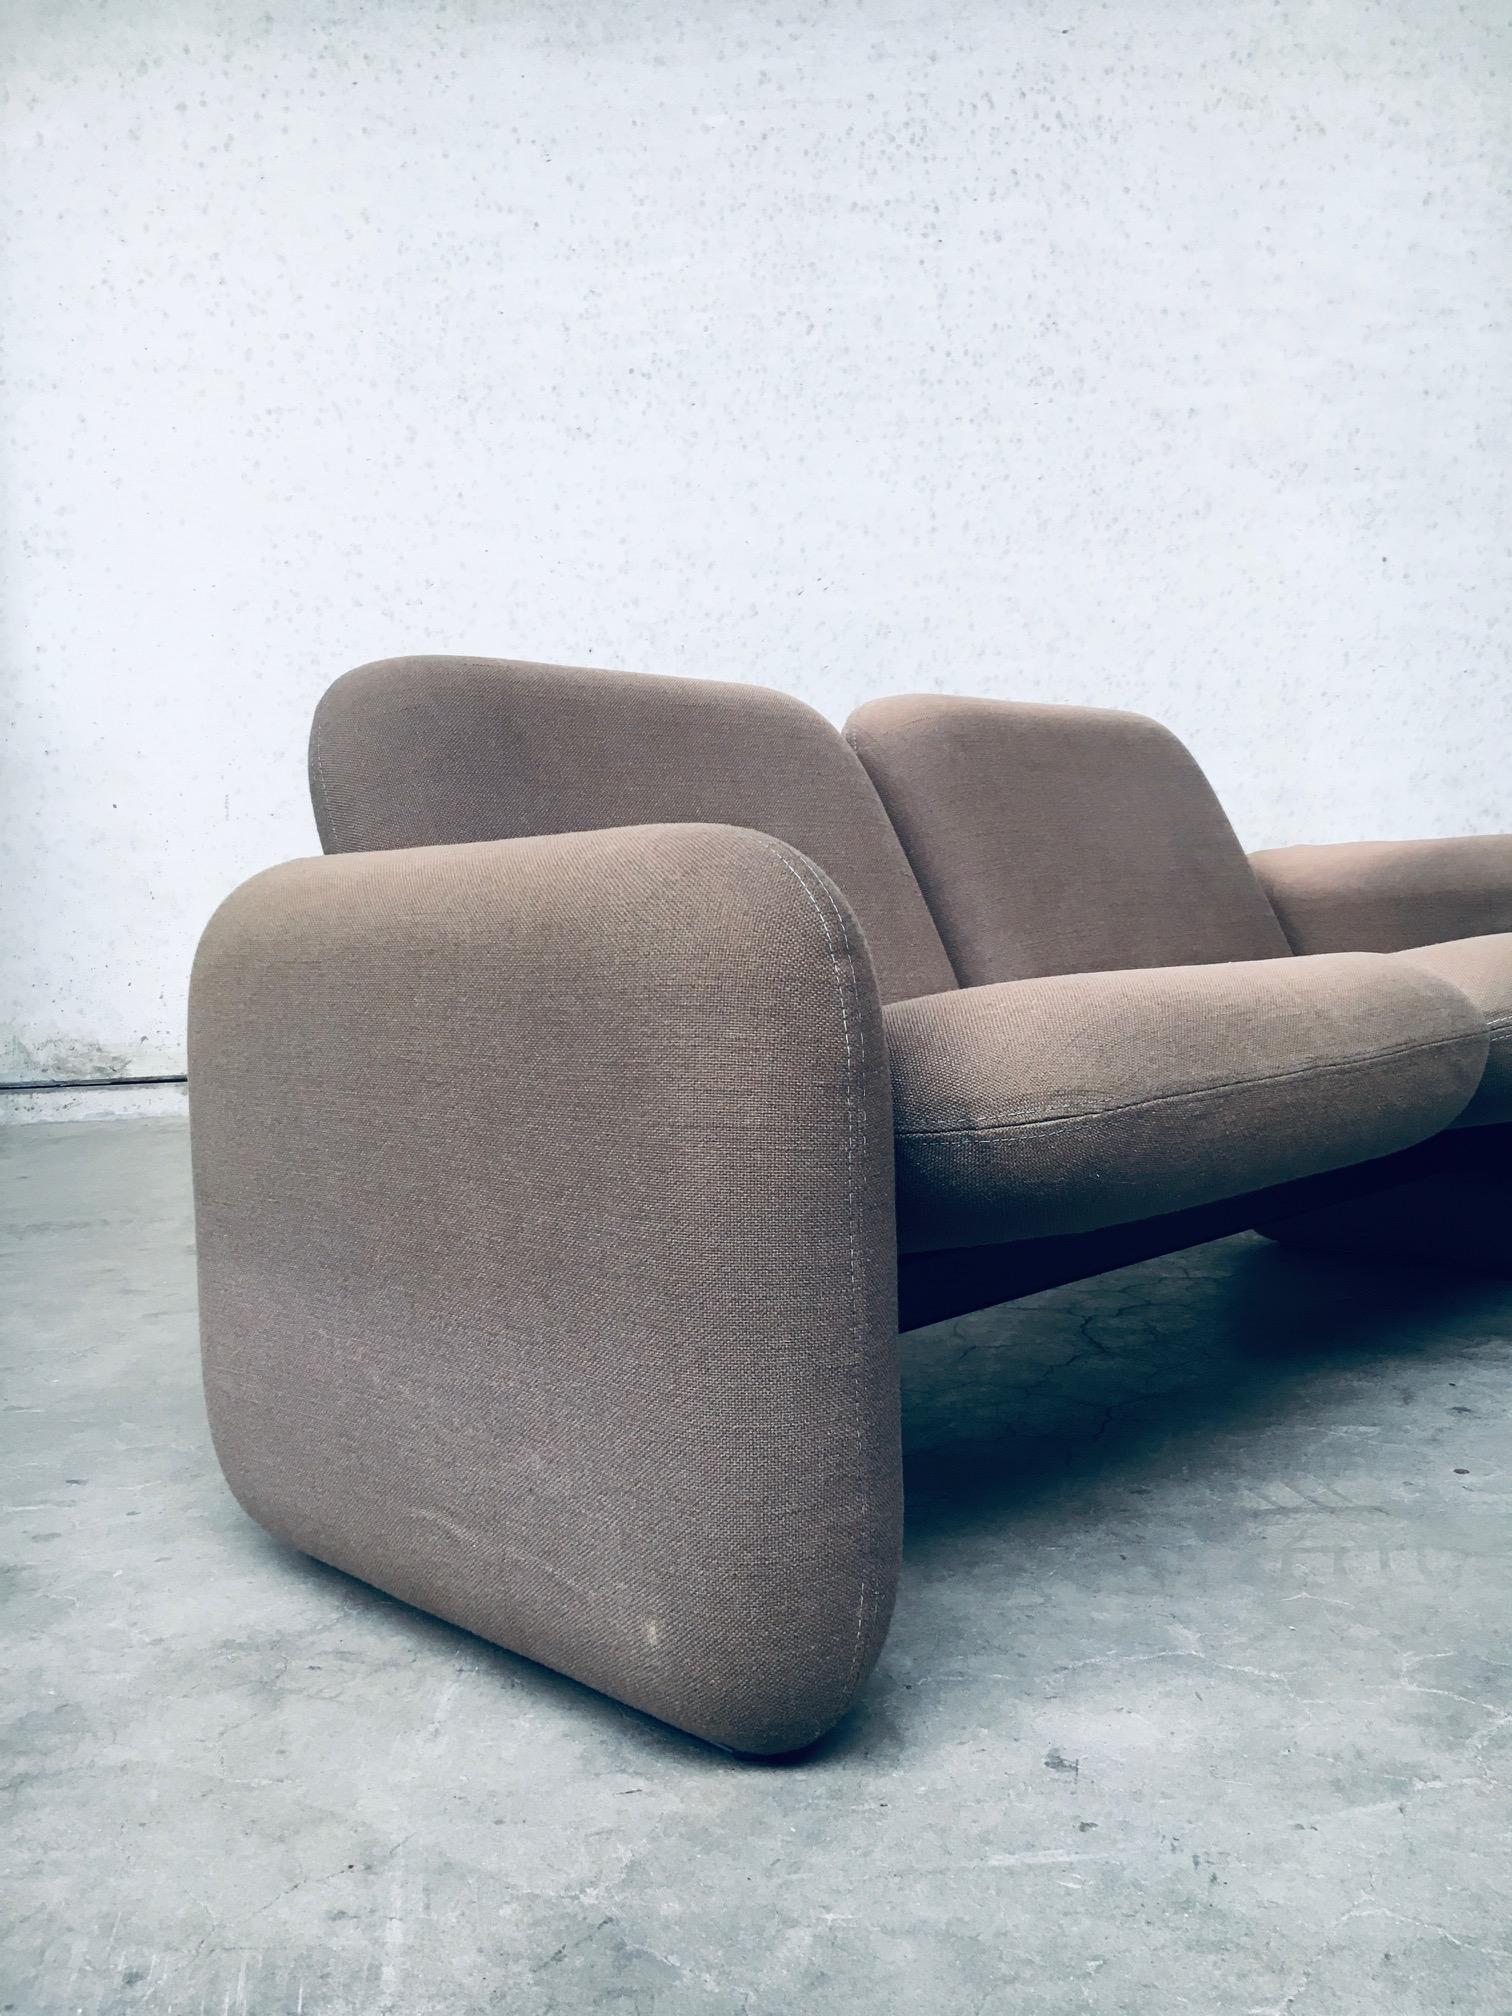 Vintage Iconic 1970s Chiclet Sofa by Ray Wilkes for Herman Miller 7